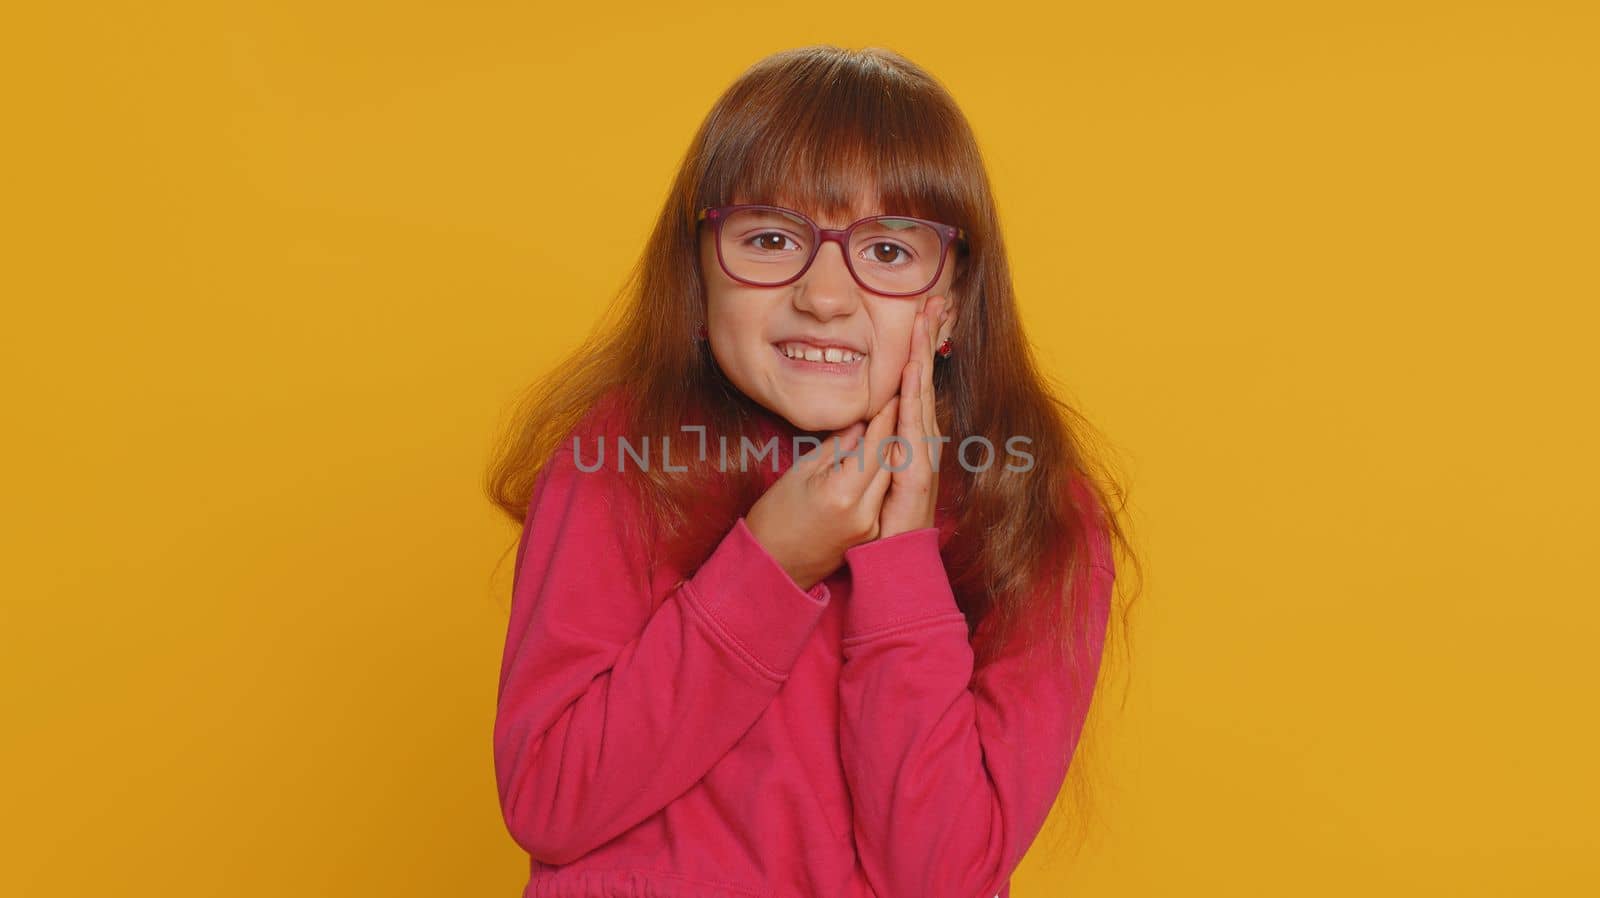 Dental problems. Young preteen child girl kid touching cheek, closing eyes with expression of terrible suffer from painful toothache, sensitive teeth, cavities. Toddler children on yellow background